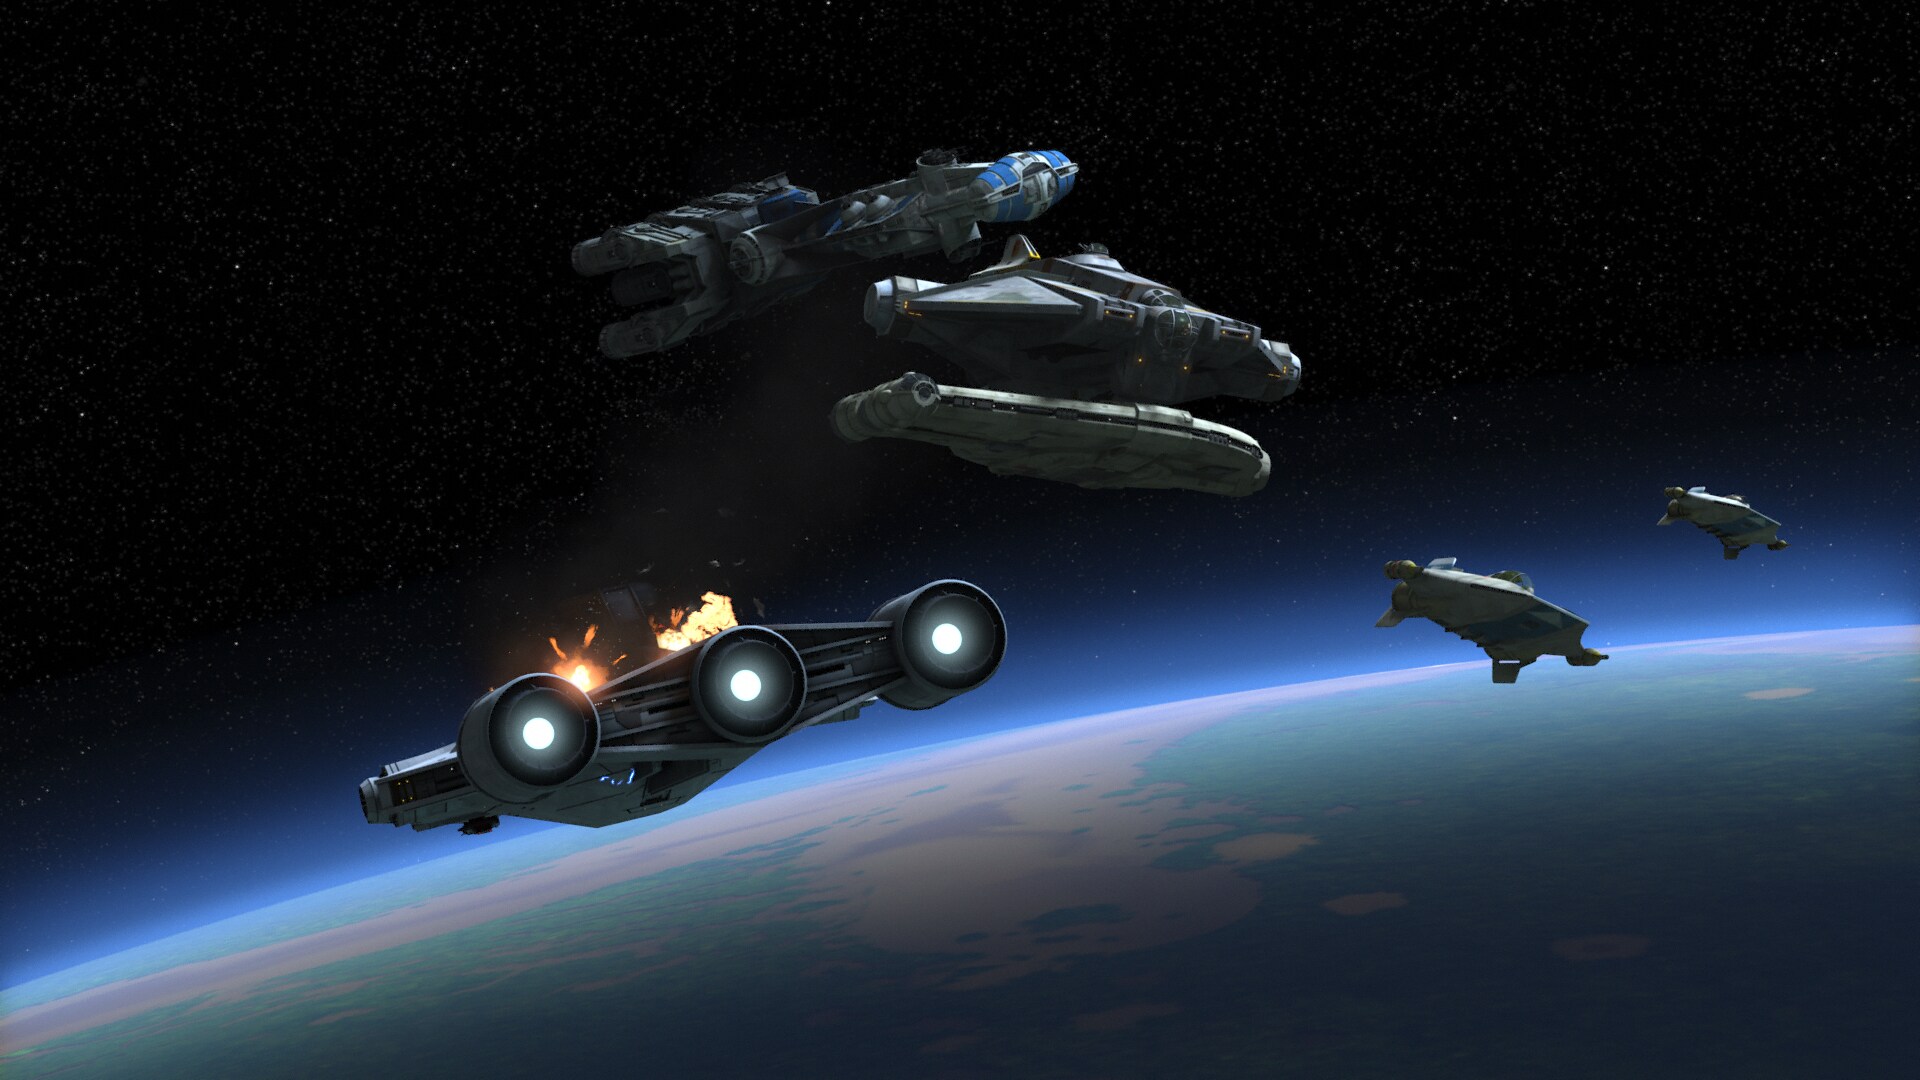 Sato and Phoenix Squadron emerge from hyperspace! They provide cover while the Ghost and Iron Squ...